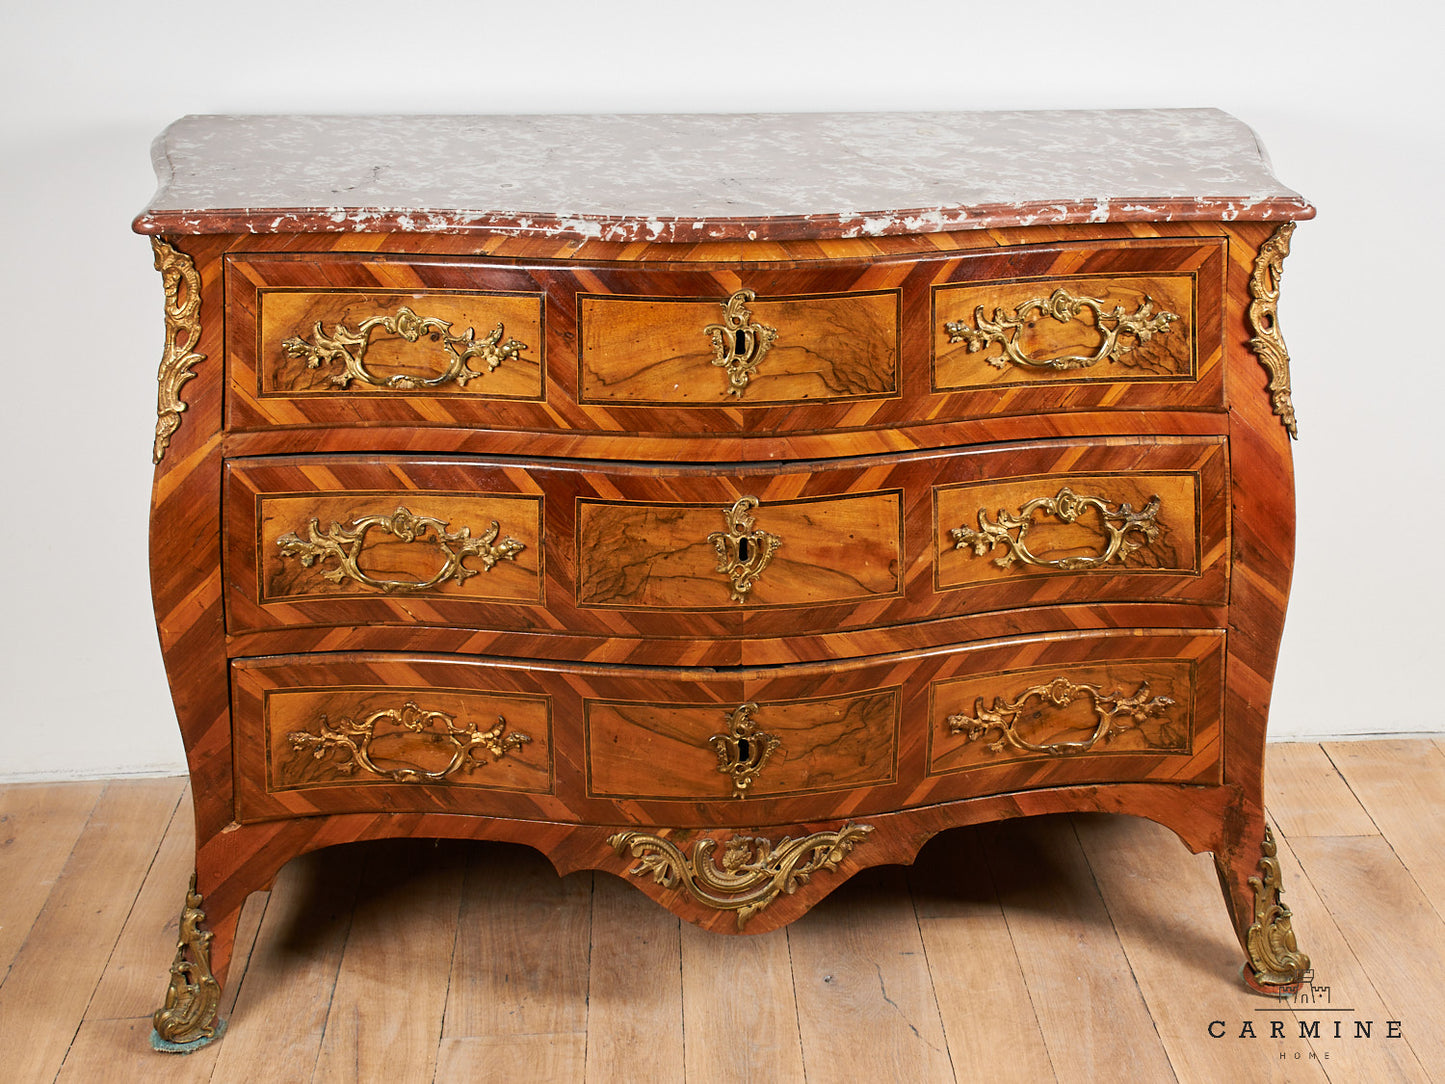 French Baroque chest of drawers, 18th century